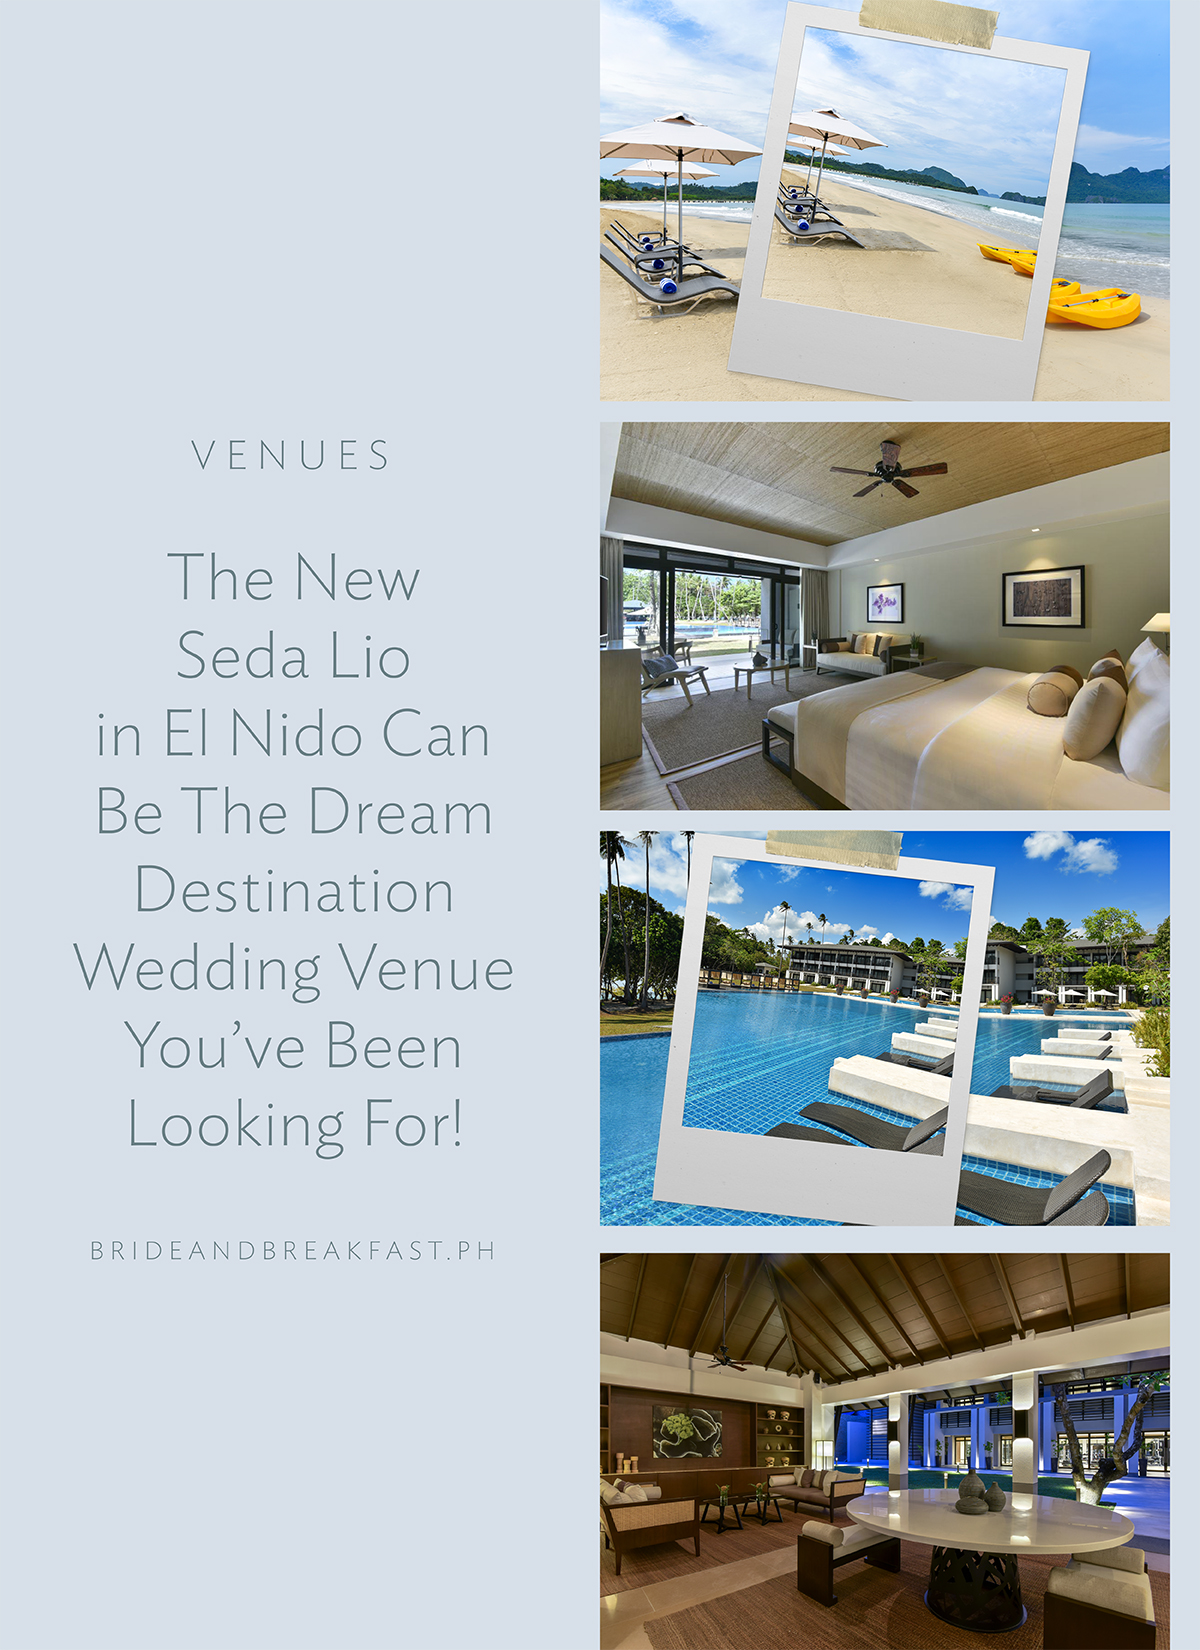 The New Seda Lio in El Nido Can Be The Dream Destination Wedding Venue You've Been Looking For!